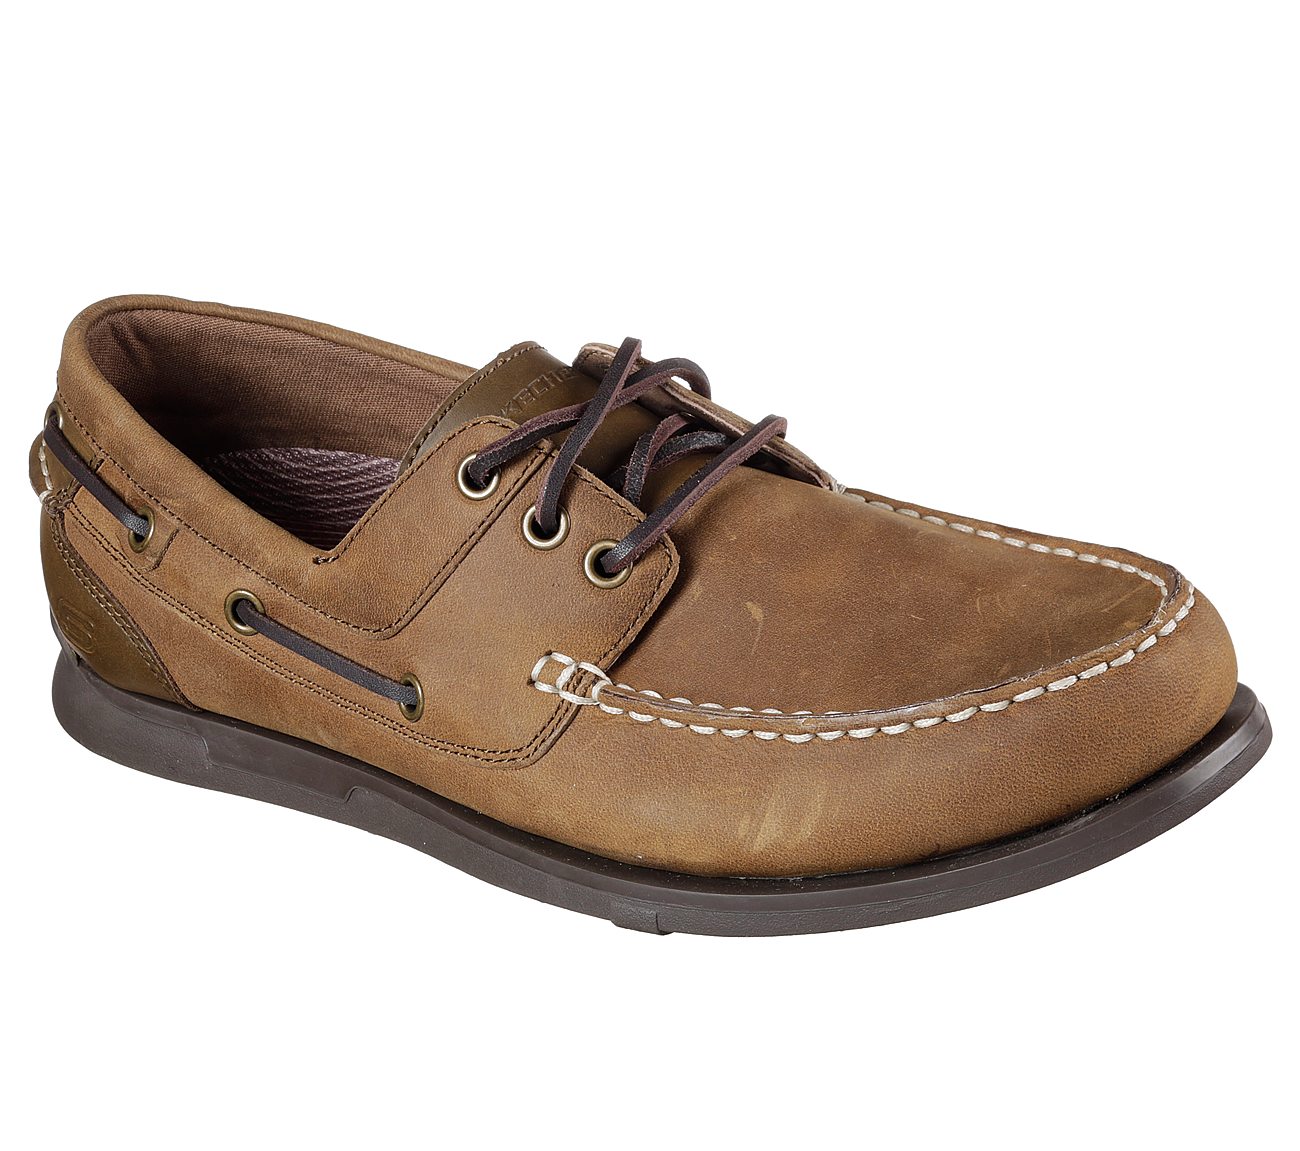 Buy SKECHERS Relaxed Fit: Eris - Sebos USA Casuals Shoes only $90.00